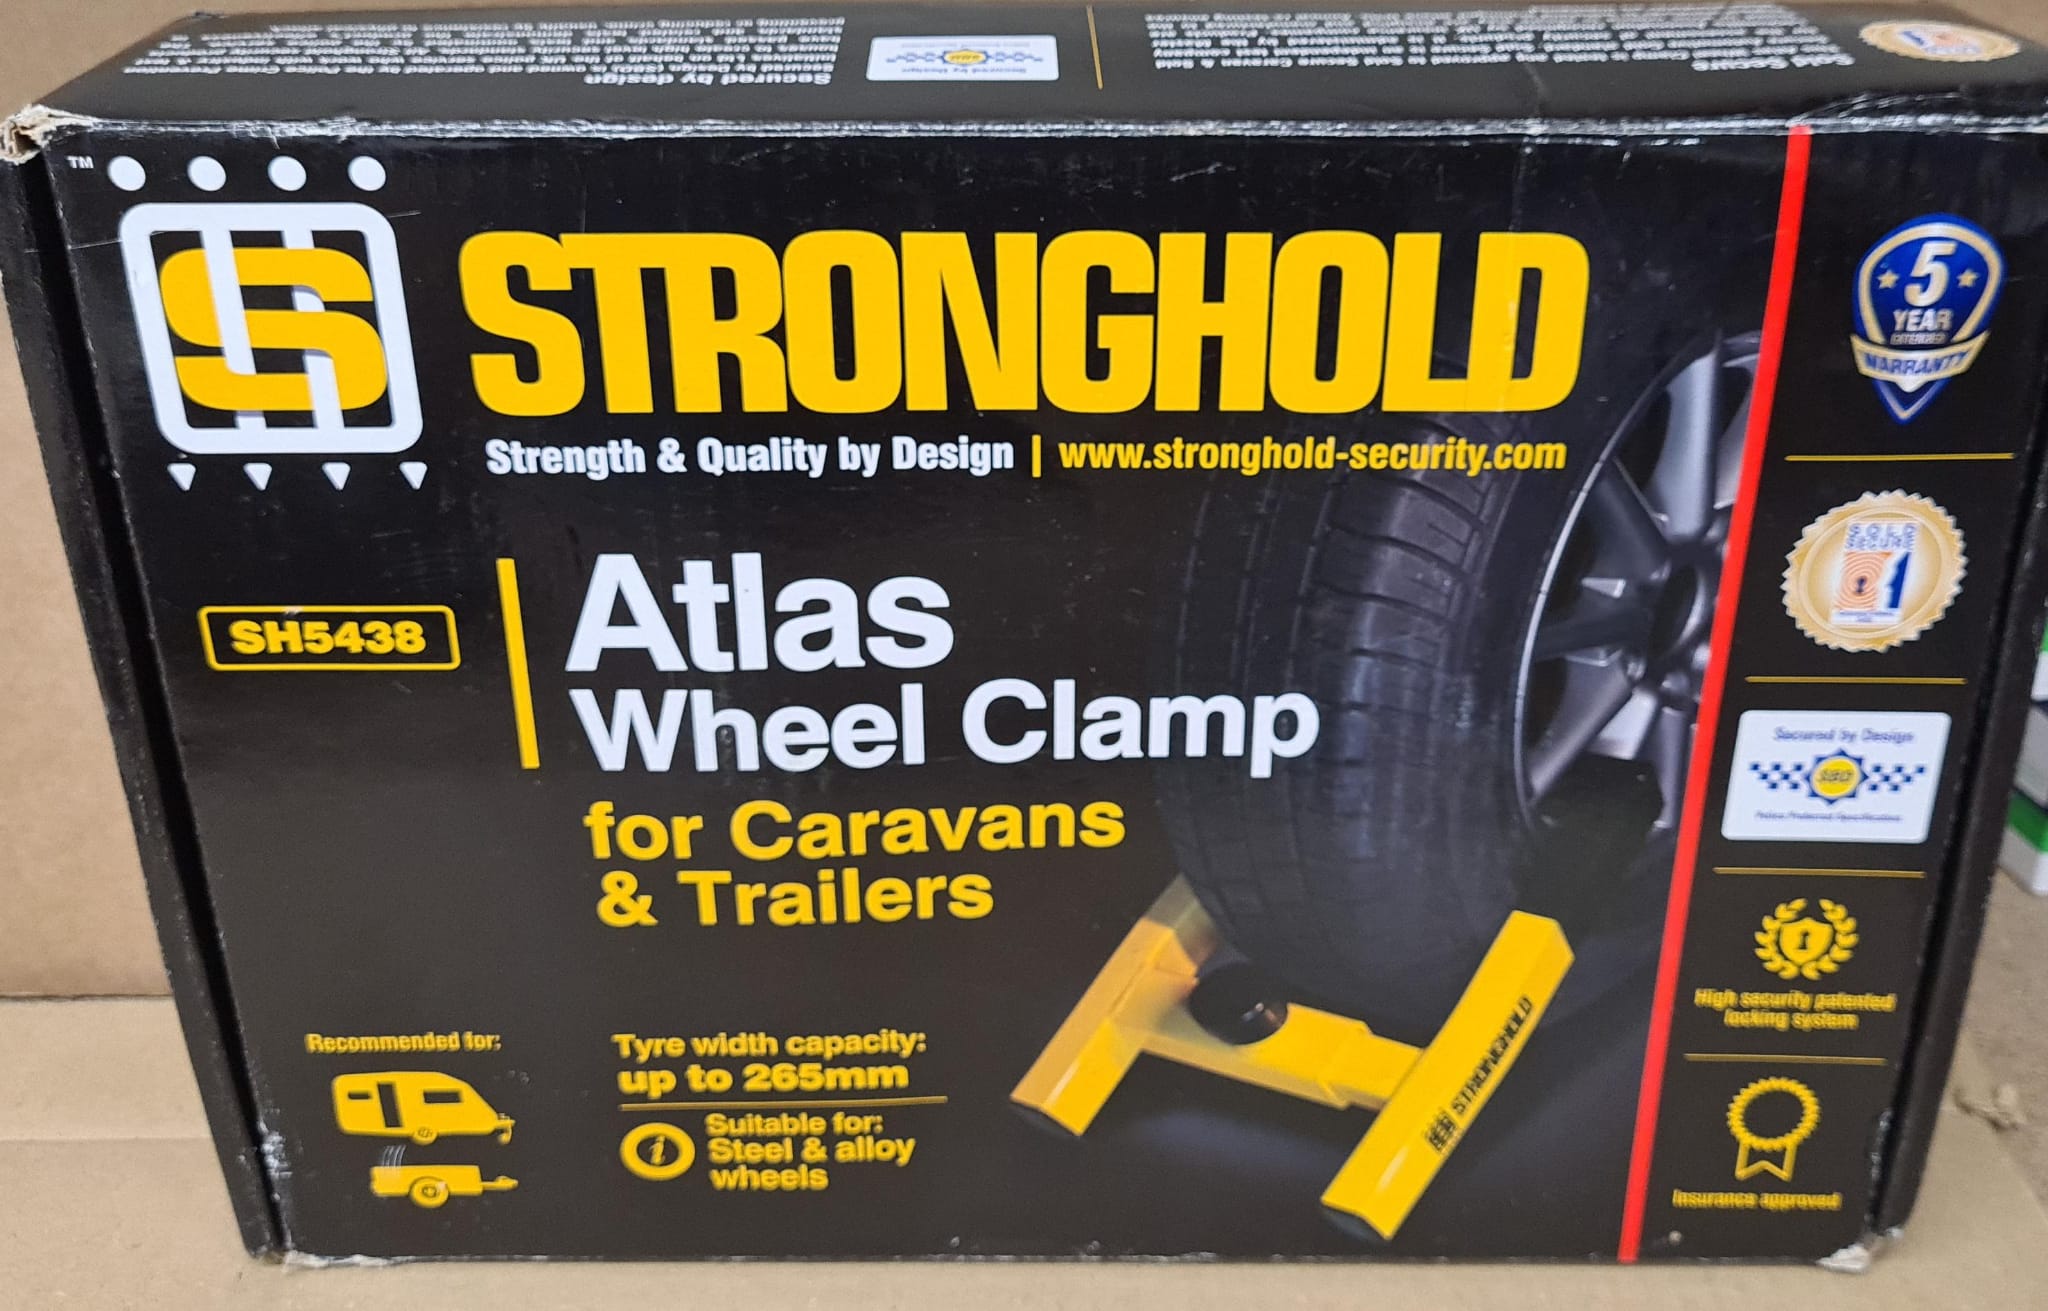 Stronghold Atlas Caravan & Trailer Wheel Clamp Fits Alloy and Steel Wheels with Tyres Up To 265 mm Wide Sold Secure Gold Standard -4383